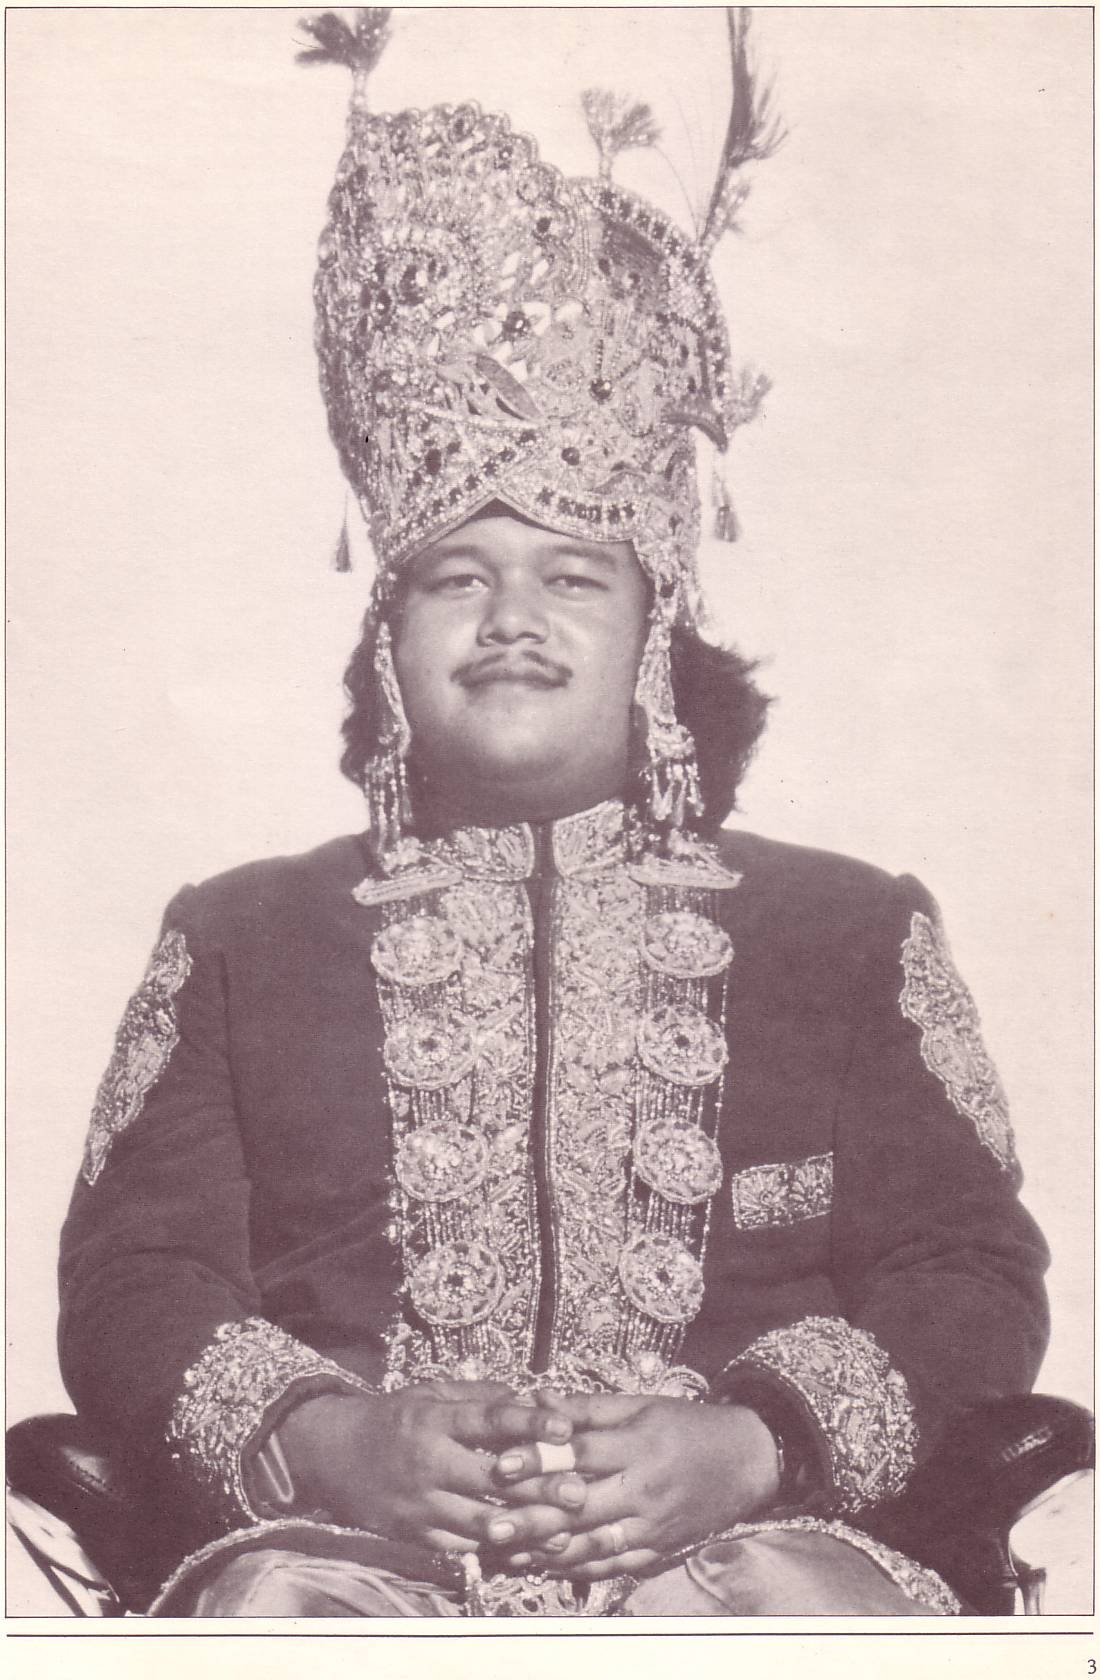 Prem Rawat (Maharaji) Dressed And Crowned As Krishna On His Throne On Stage